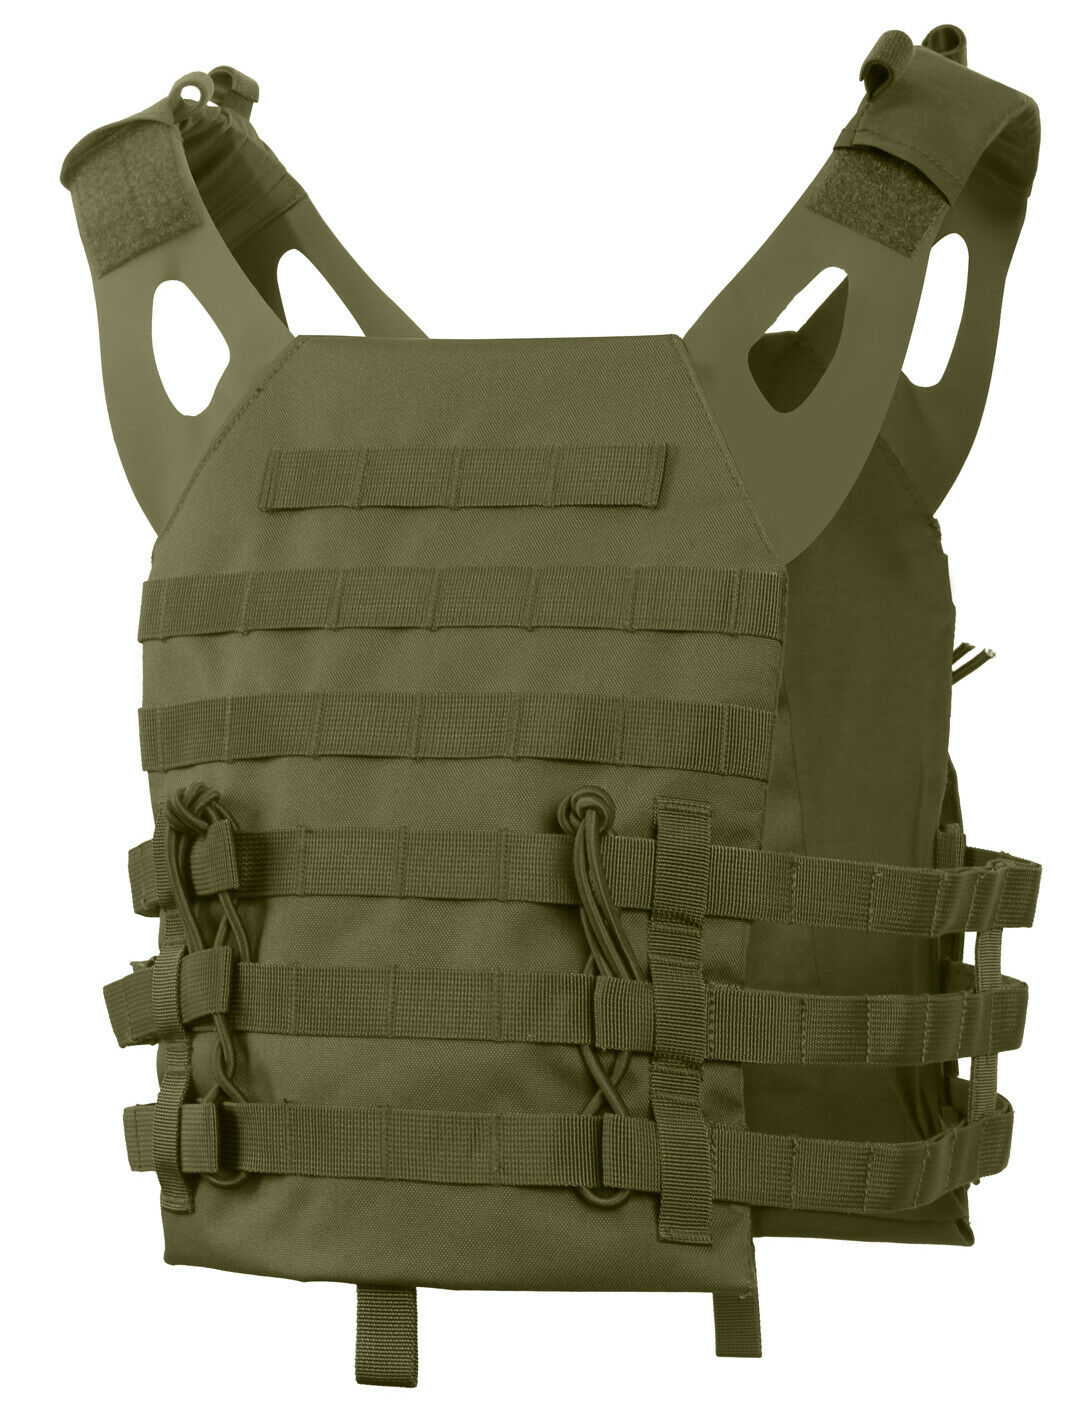 Rothco Lightweight Armor Plate Carrier Vest Oversized 2XL 3XL - Olive Drab